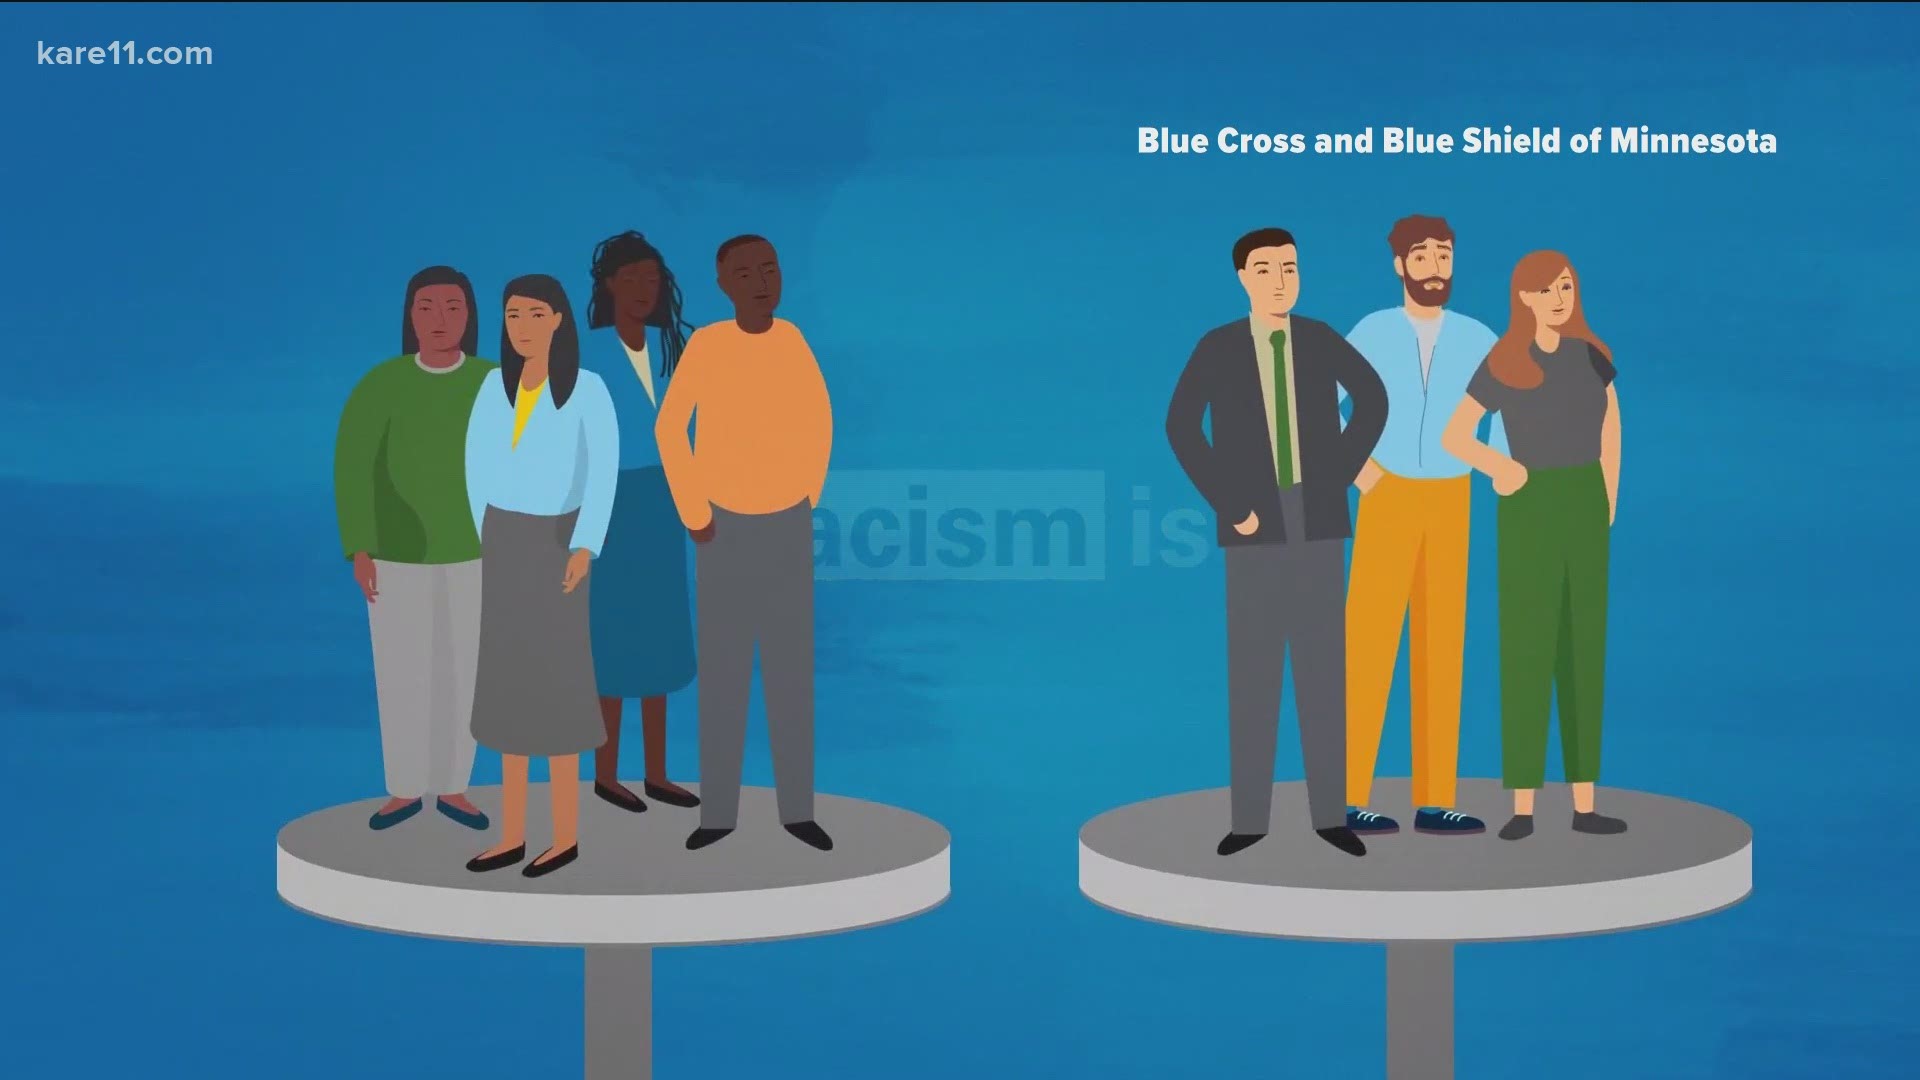 Blue Cross Blue Shield of Minnesota conducted a poll and found the divide in health equity not only exists but the divide in how it's viewed exists too